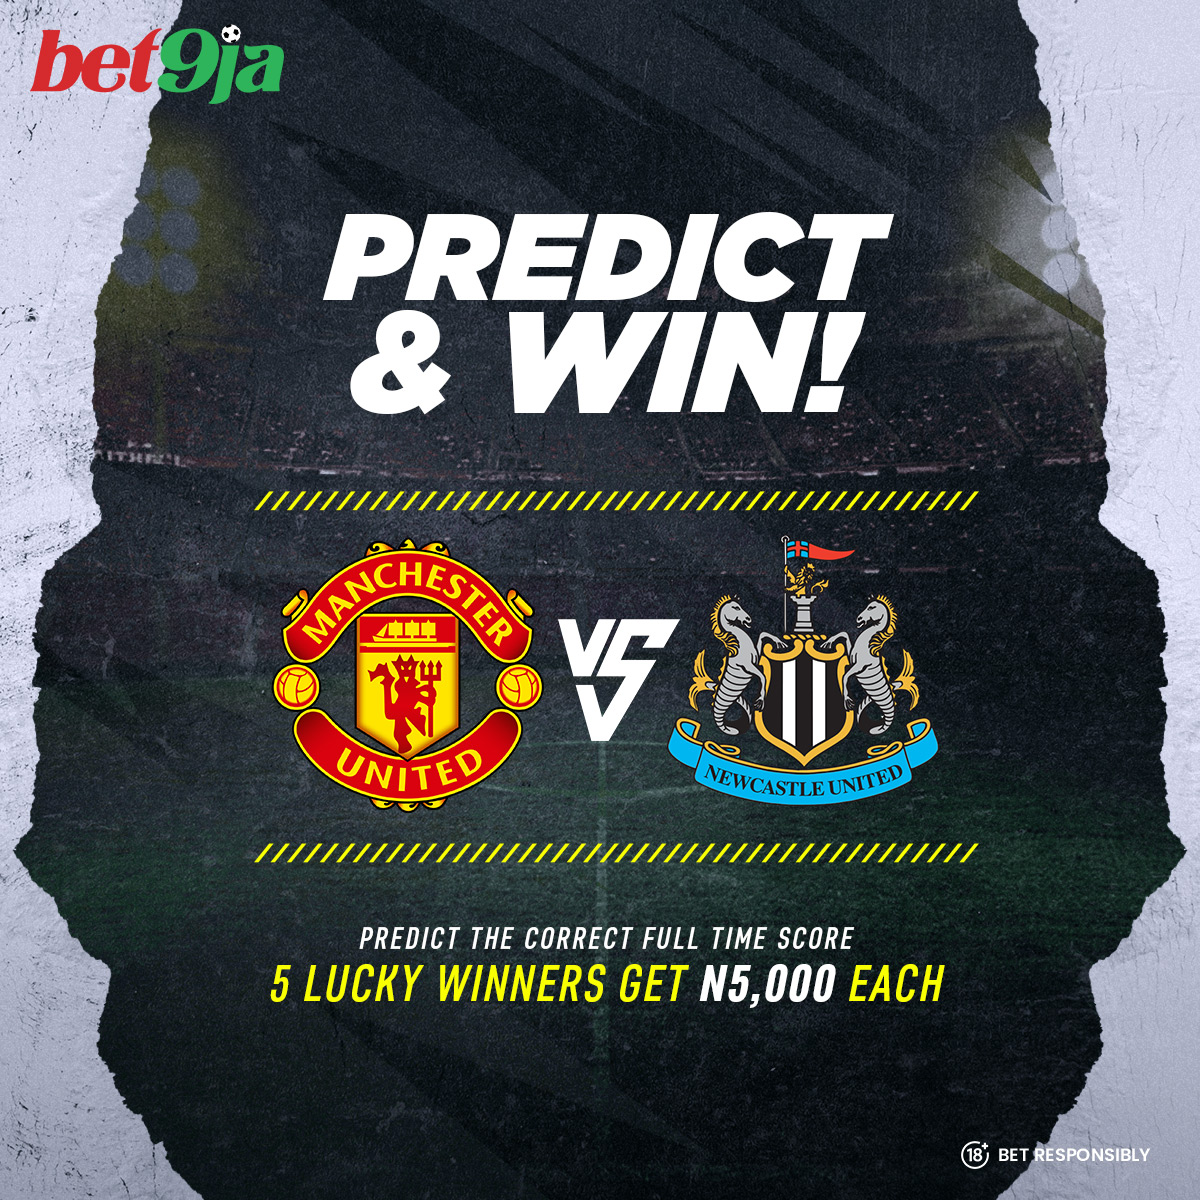 Comment the correct full-time score & your 𝐛𝐞𝐭𝟗𝐣𝐚 𝐈𝐃 and stand a chance to win N5,000 All predictions end on Wednesday 15th May 2024 at 7:00 pm Multiple and/or edited comments will be disqualified. Five winners will be selected at random #Bet9jaPredictAndwin